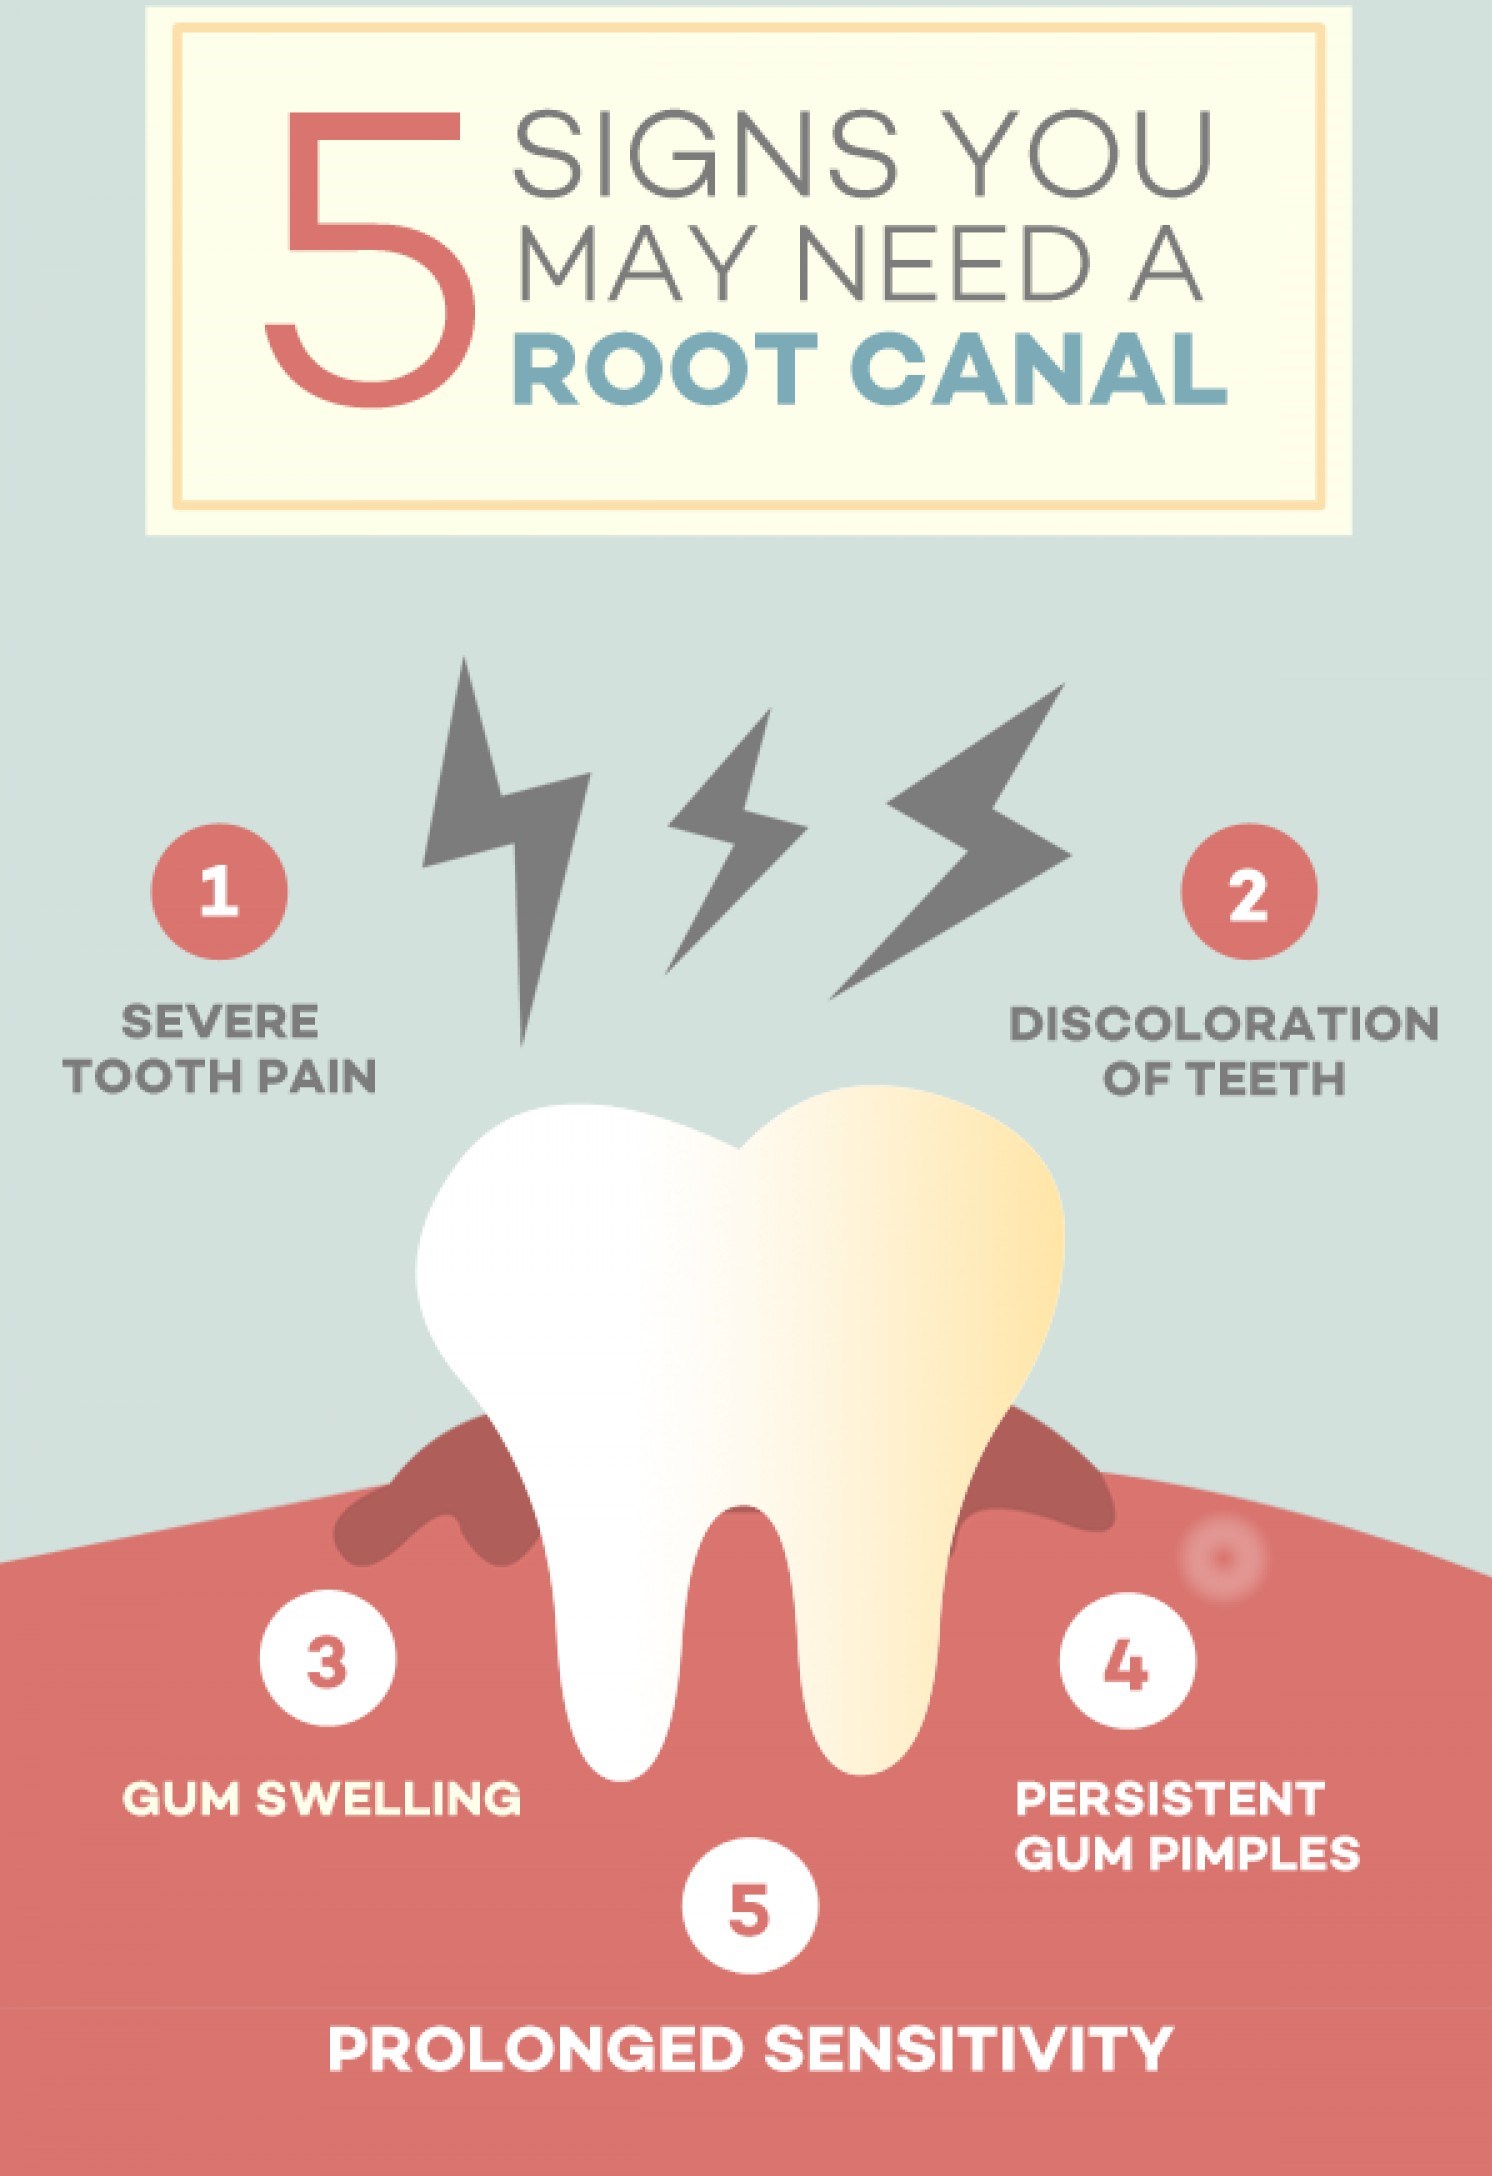 Common Symptoms and Signs You Might Need a Root Canal